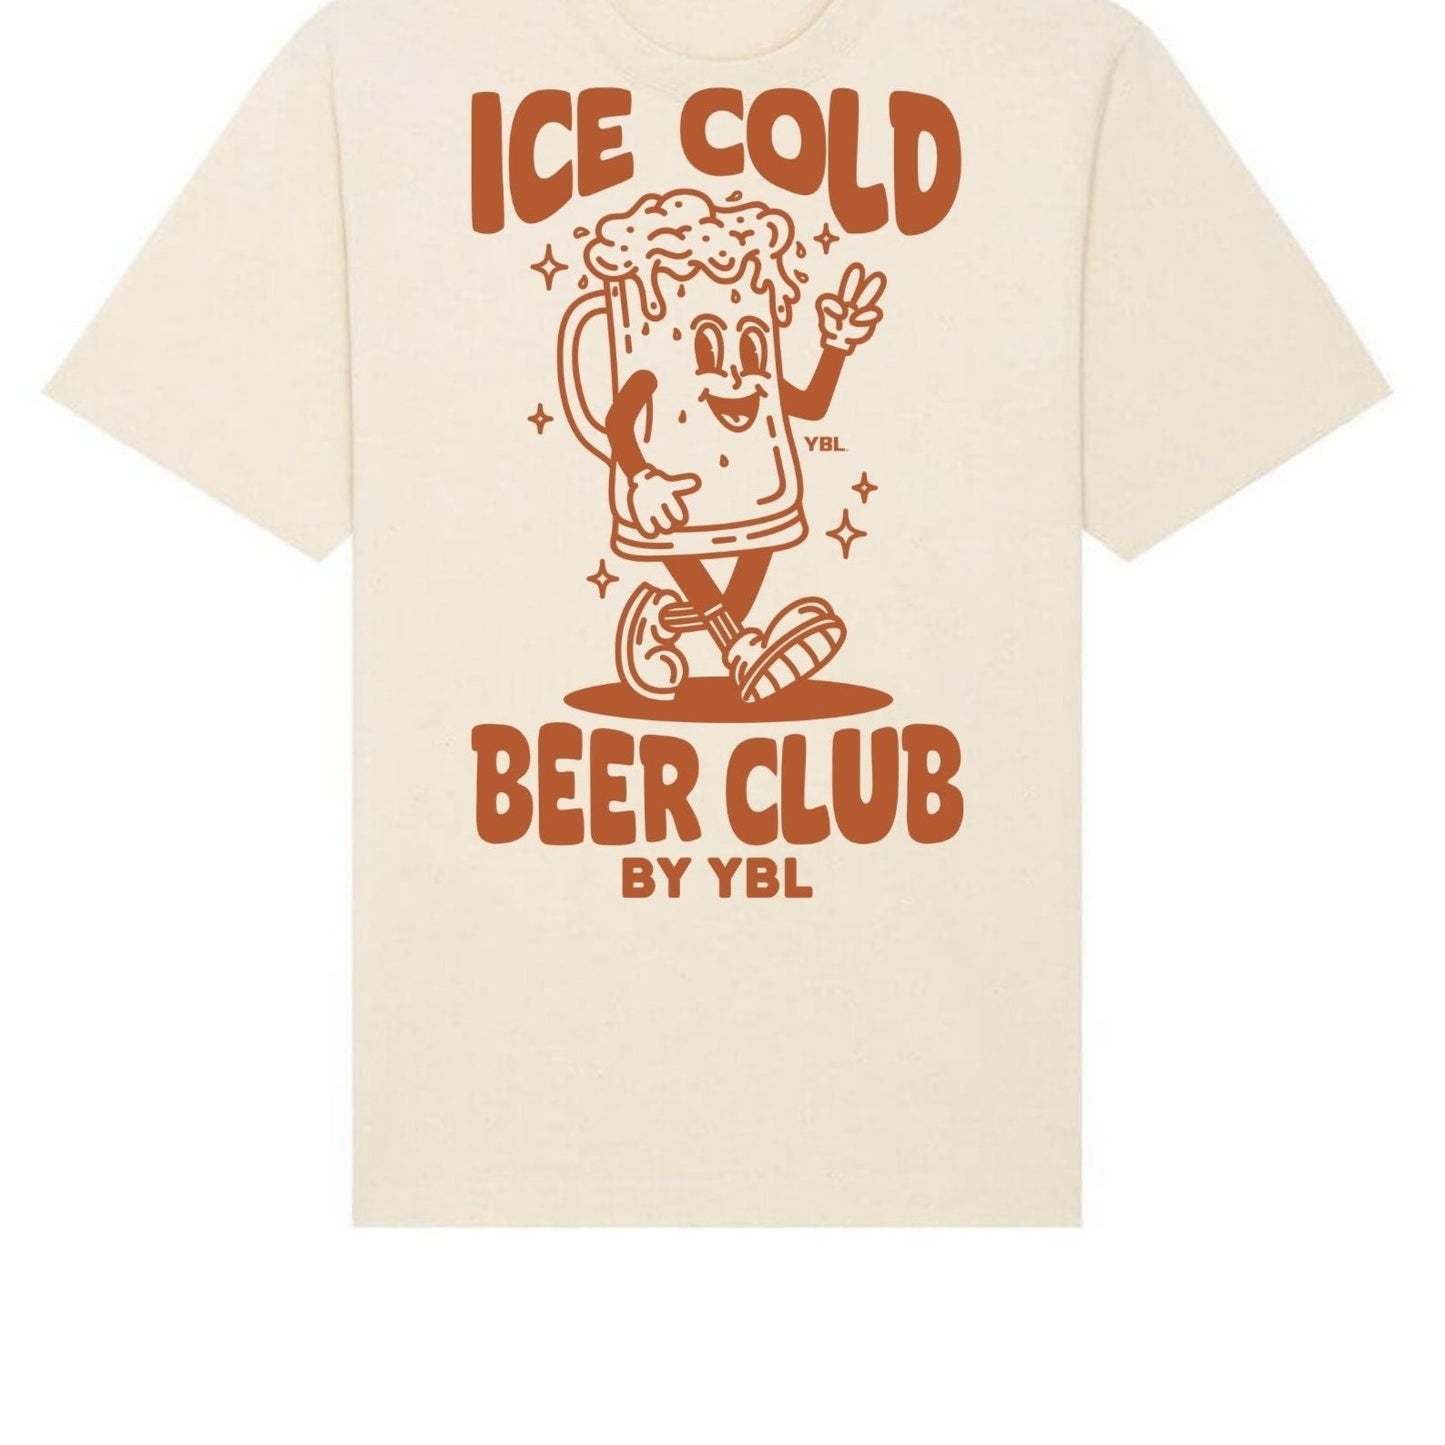 Ice Cold Beer Club with YBL on the front Unisex Oversized Tee in Natural Raw